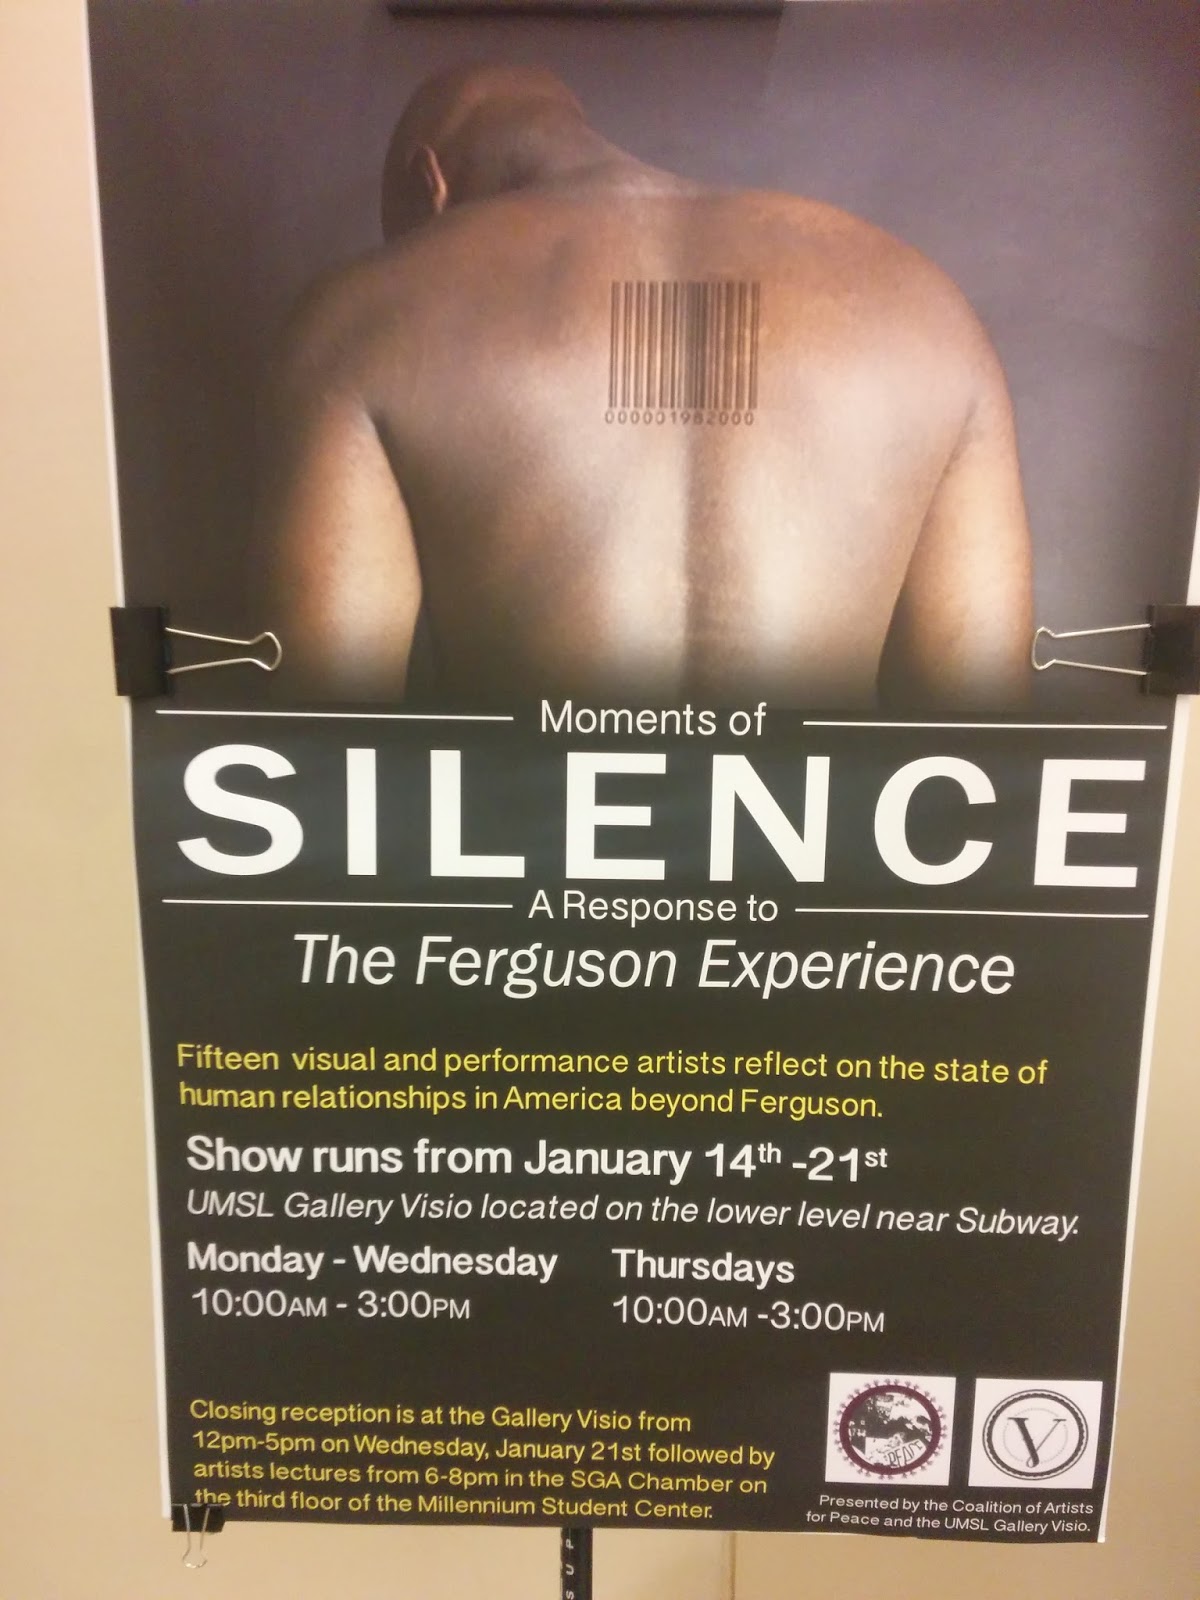 Photograph of a poster for an on-campus art exhibit about Ferguson. The exhibit is entitled 'Moments of Silence: A Response to the Ferguson Experience,' and the poster features a dramatic photograph of a black man's back, marked with a barcode. The poster notes that the artists featured, both visual and performing, will 'reflect on the state of human relationships in America beyond Ferguson.' The text is white and yellow.